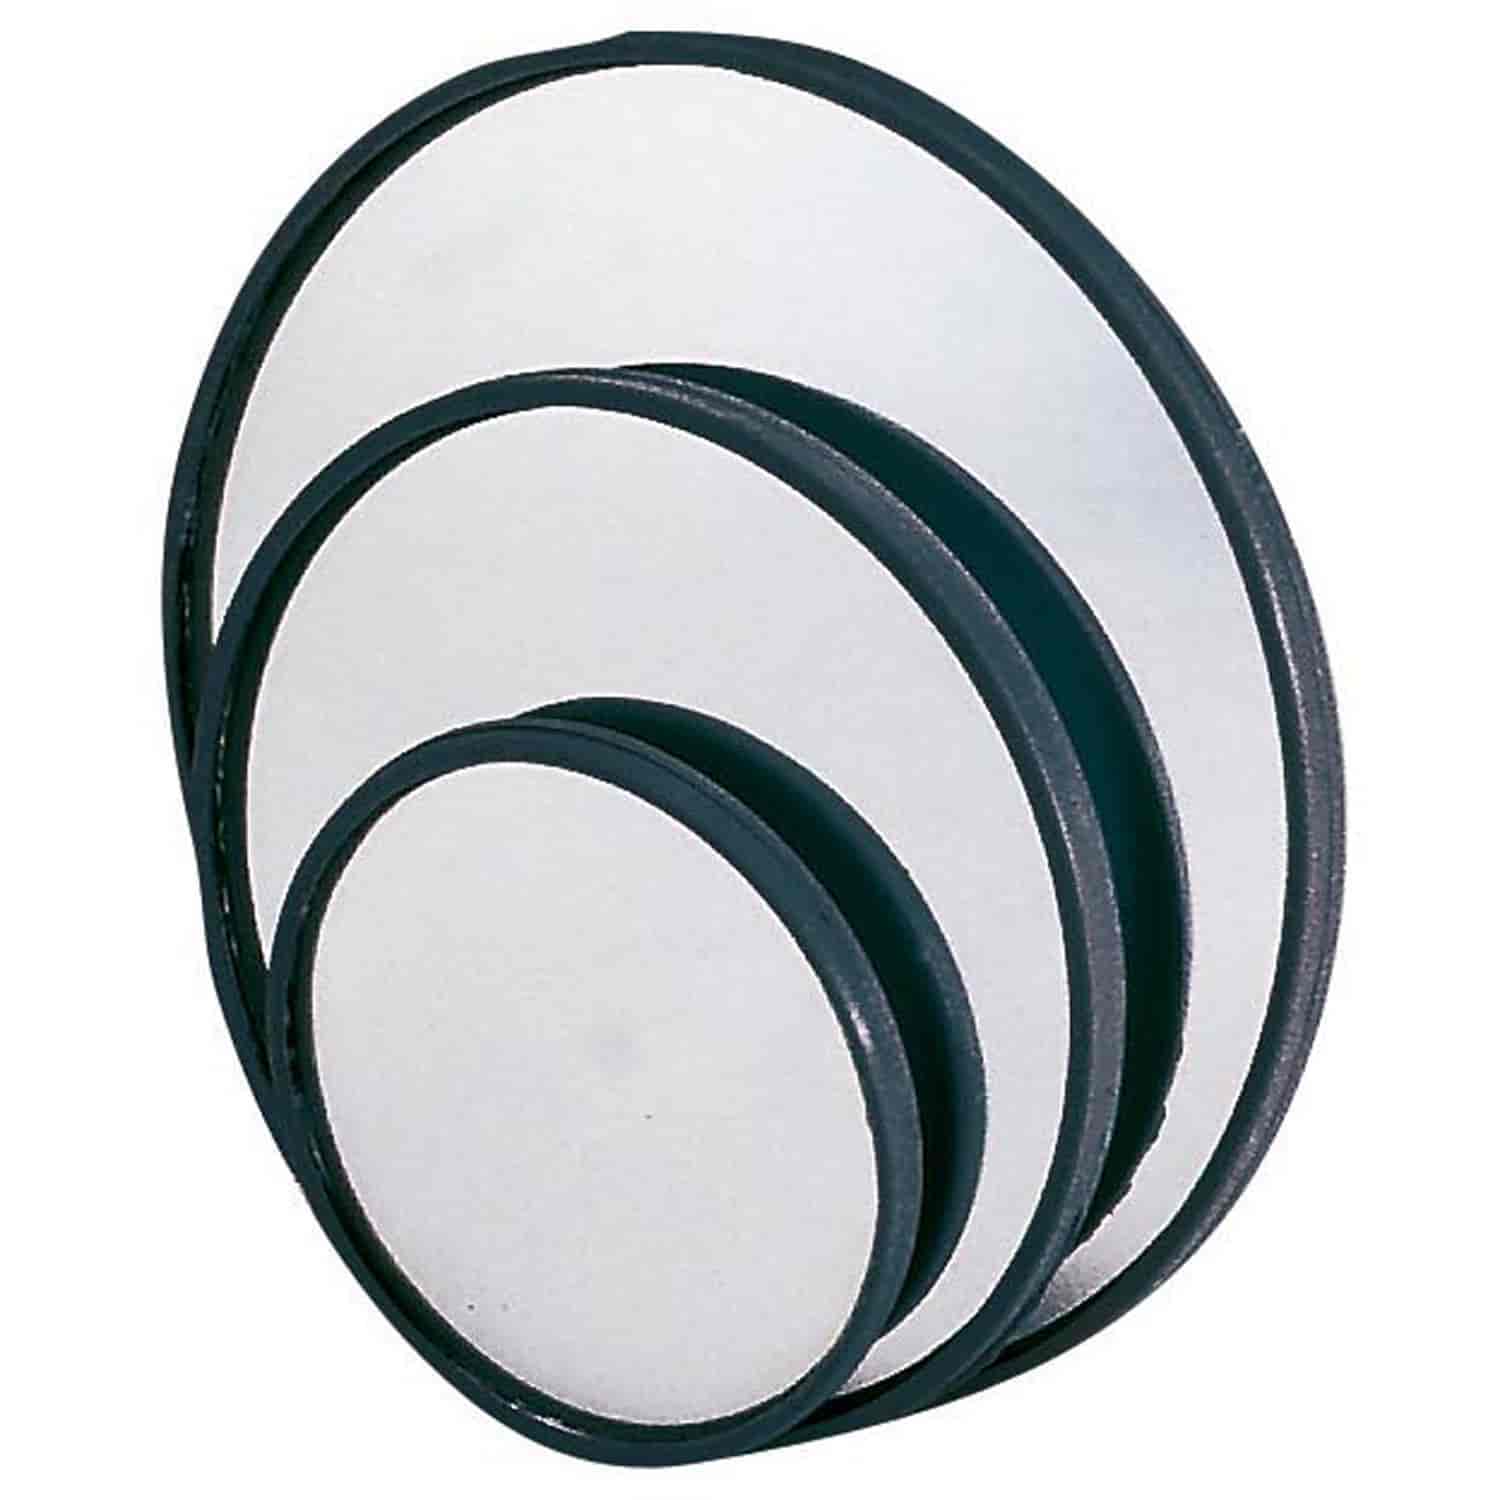 Stick-On Round Mirror This mirror is 3-3/4 inches in diameter.